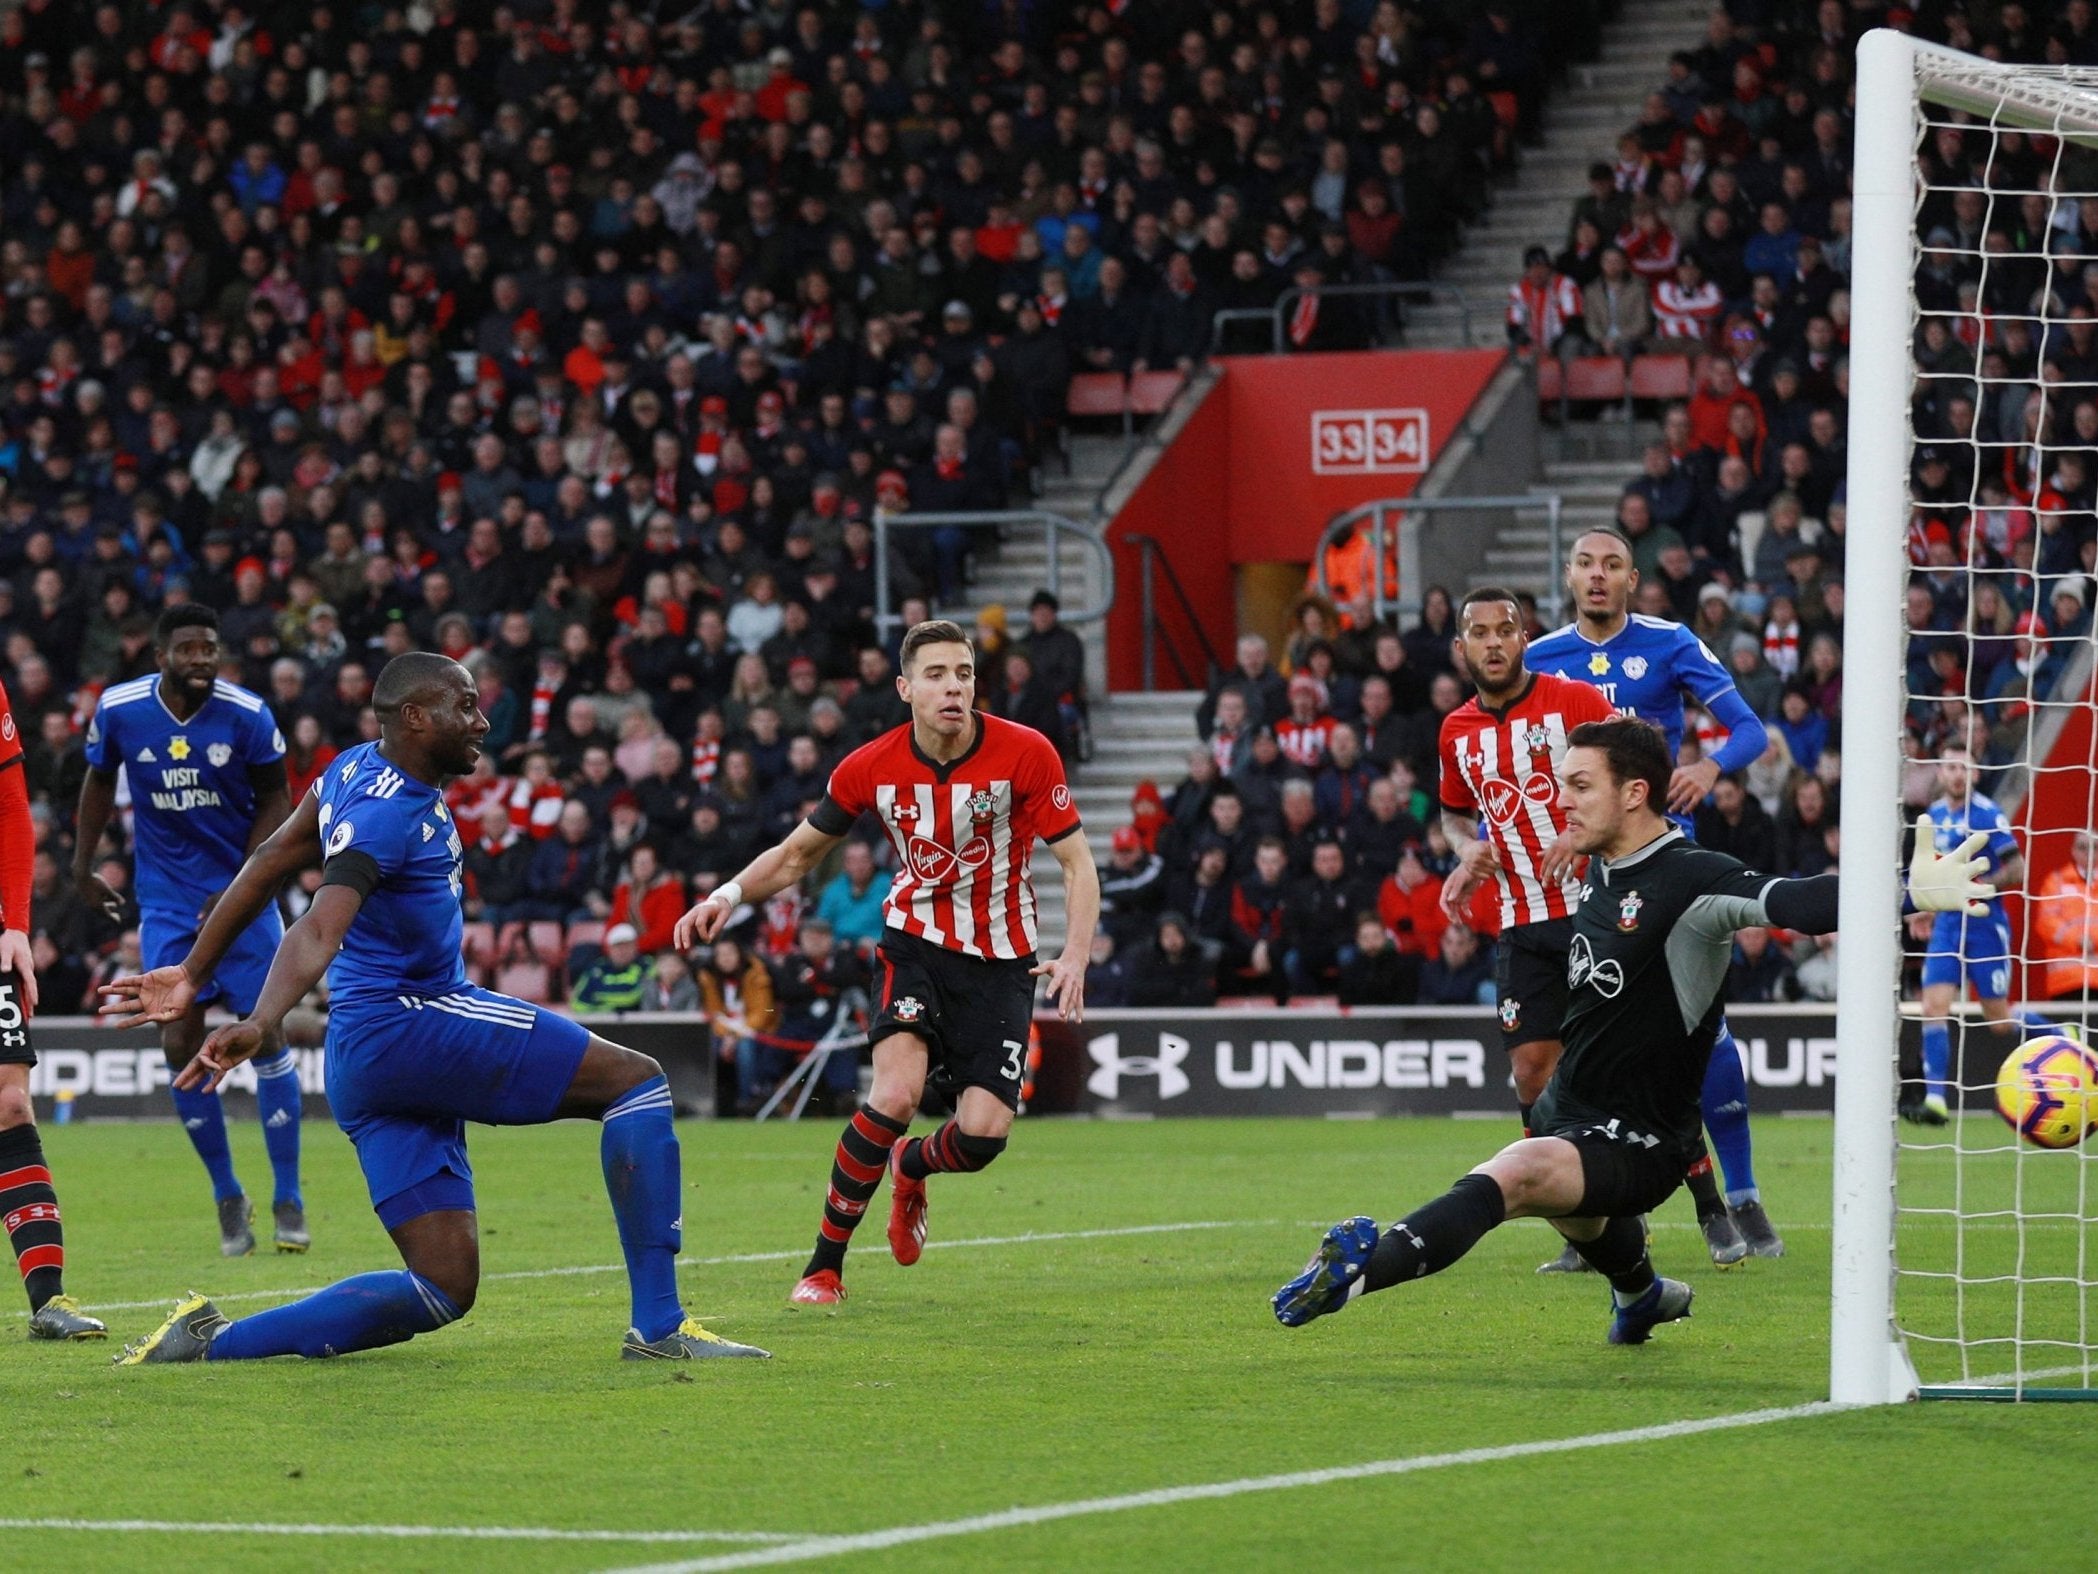 Sol Bamba puts Cardiff in front at St Mary's